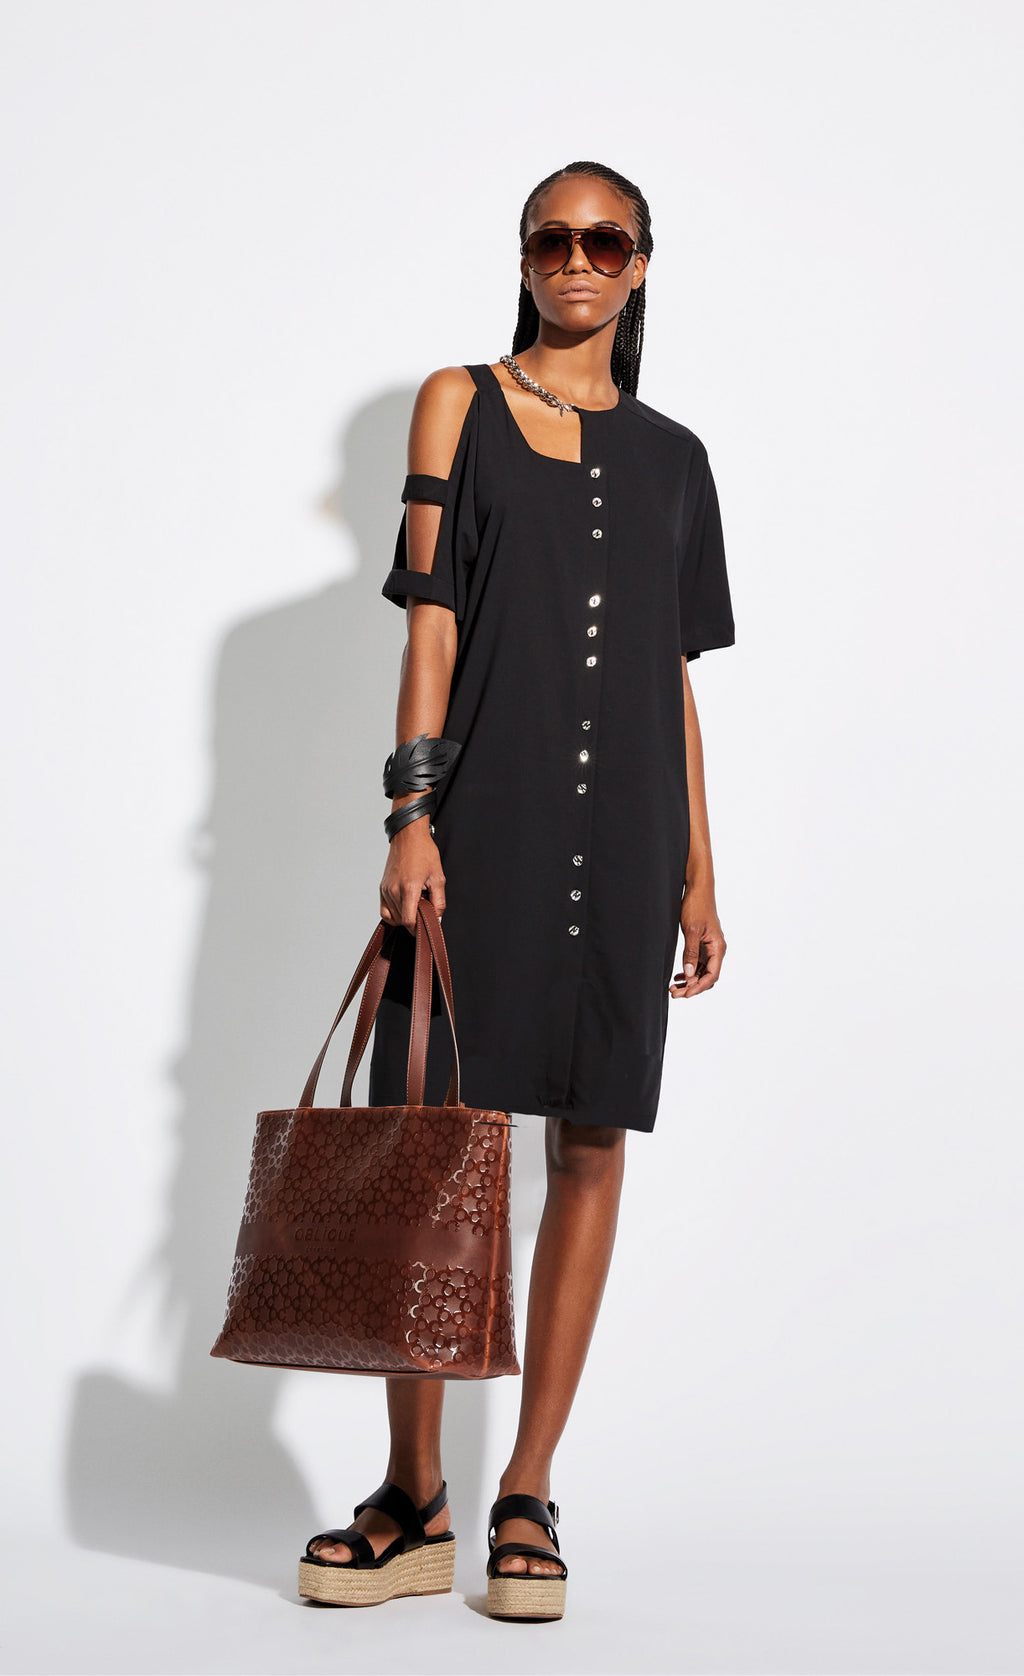 Front full body view of a woman wearing the Oblique Creations Black Cutout Dress. This dress has a button down front with every three buttons grouped off. The dress goes down to the model's knees. The right sleeve has cutouts to expose the arm. The right portion of the neckline is cut out and has a silver chain around it. The model is also holding a large brown hand bag and wearing large brown sunglasses.